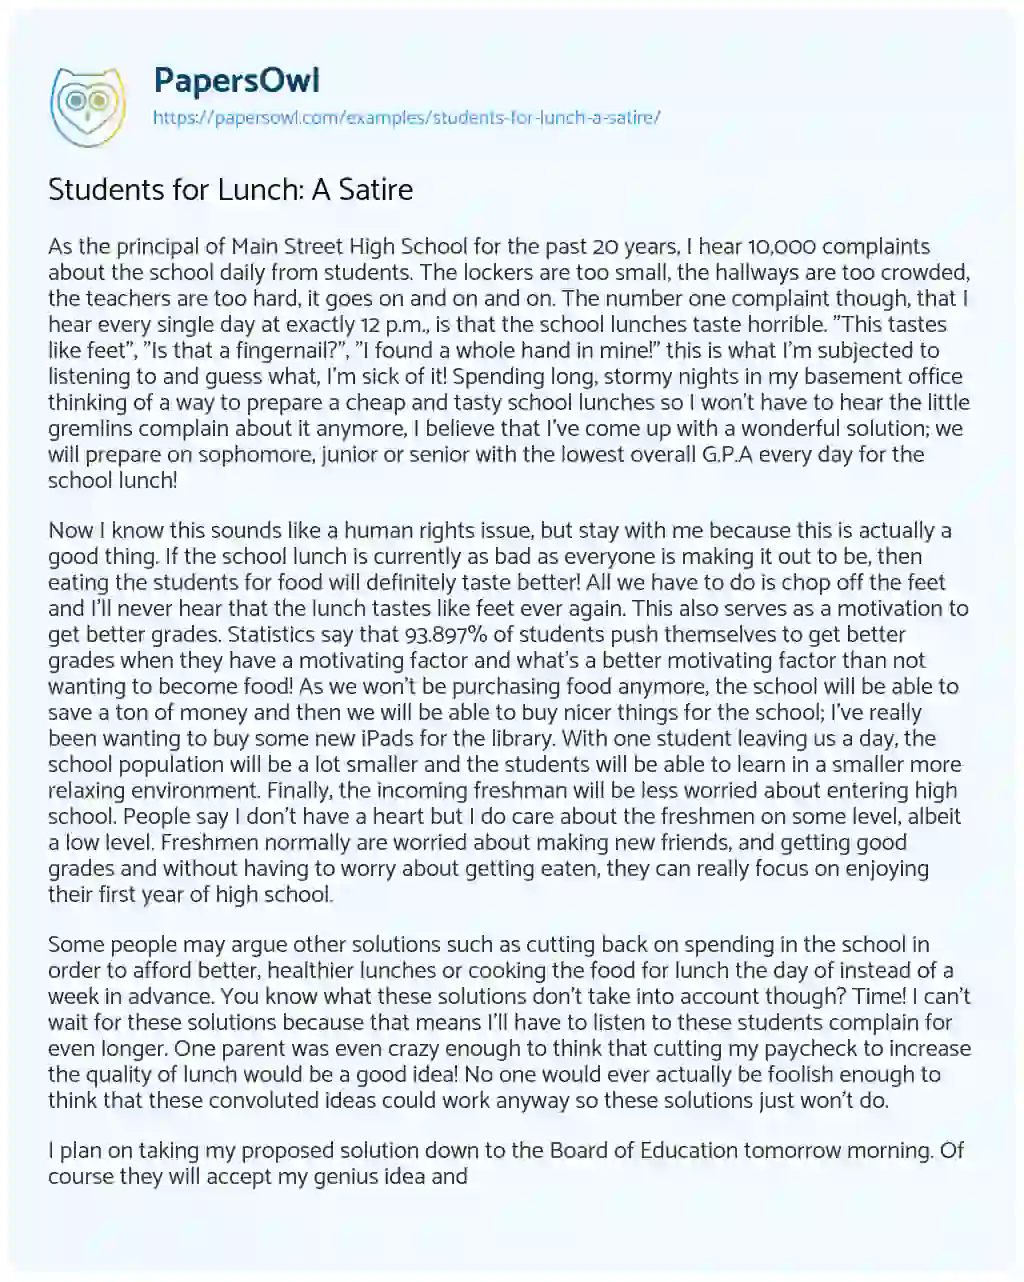 Essay on Students for Lunch: a Satire